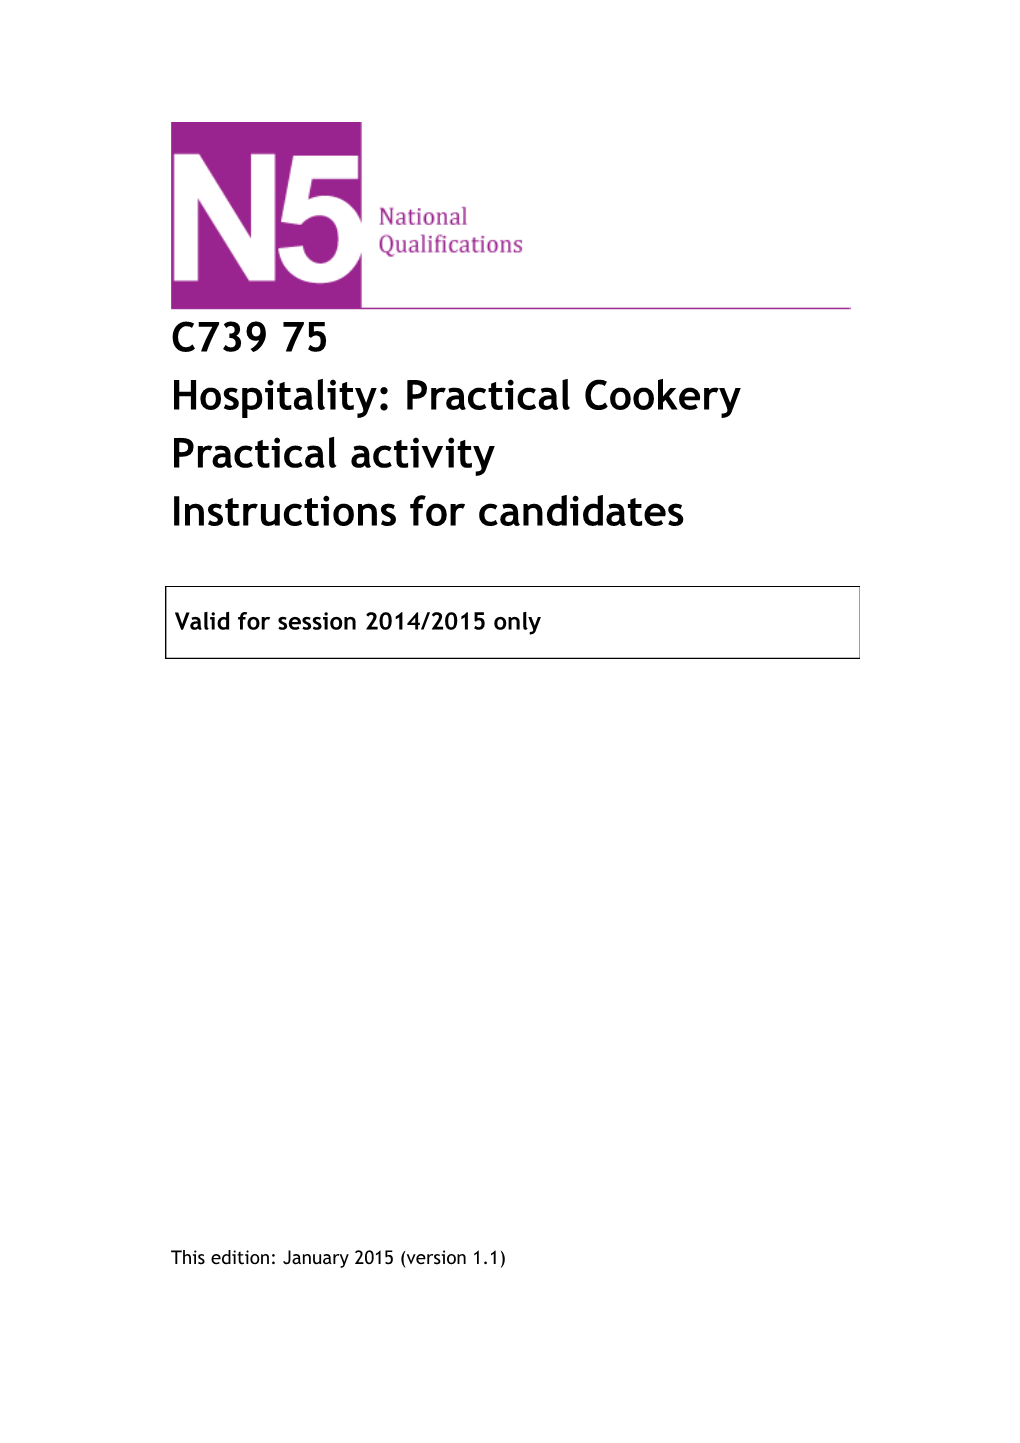 Hospitality: Practical Cookery